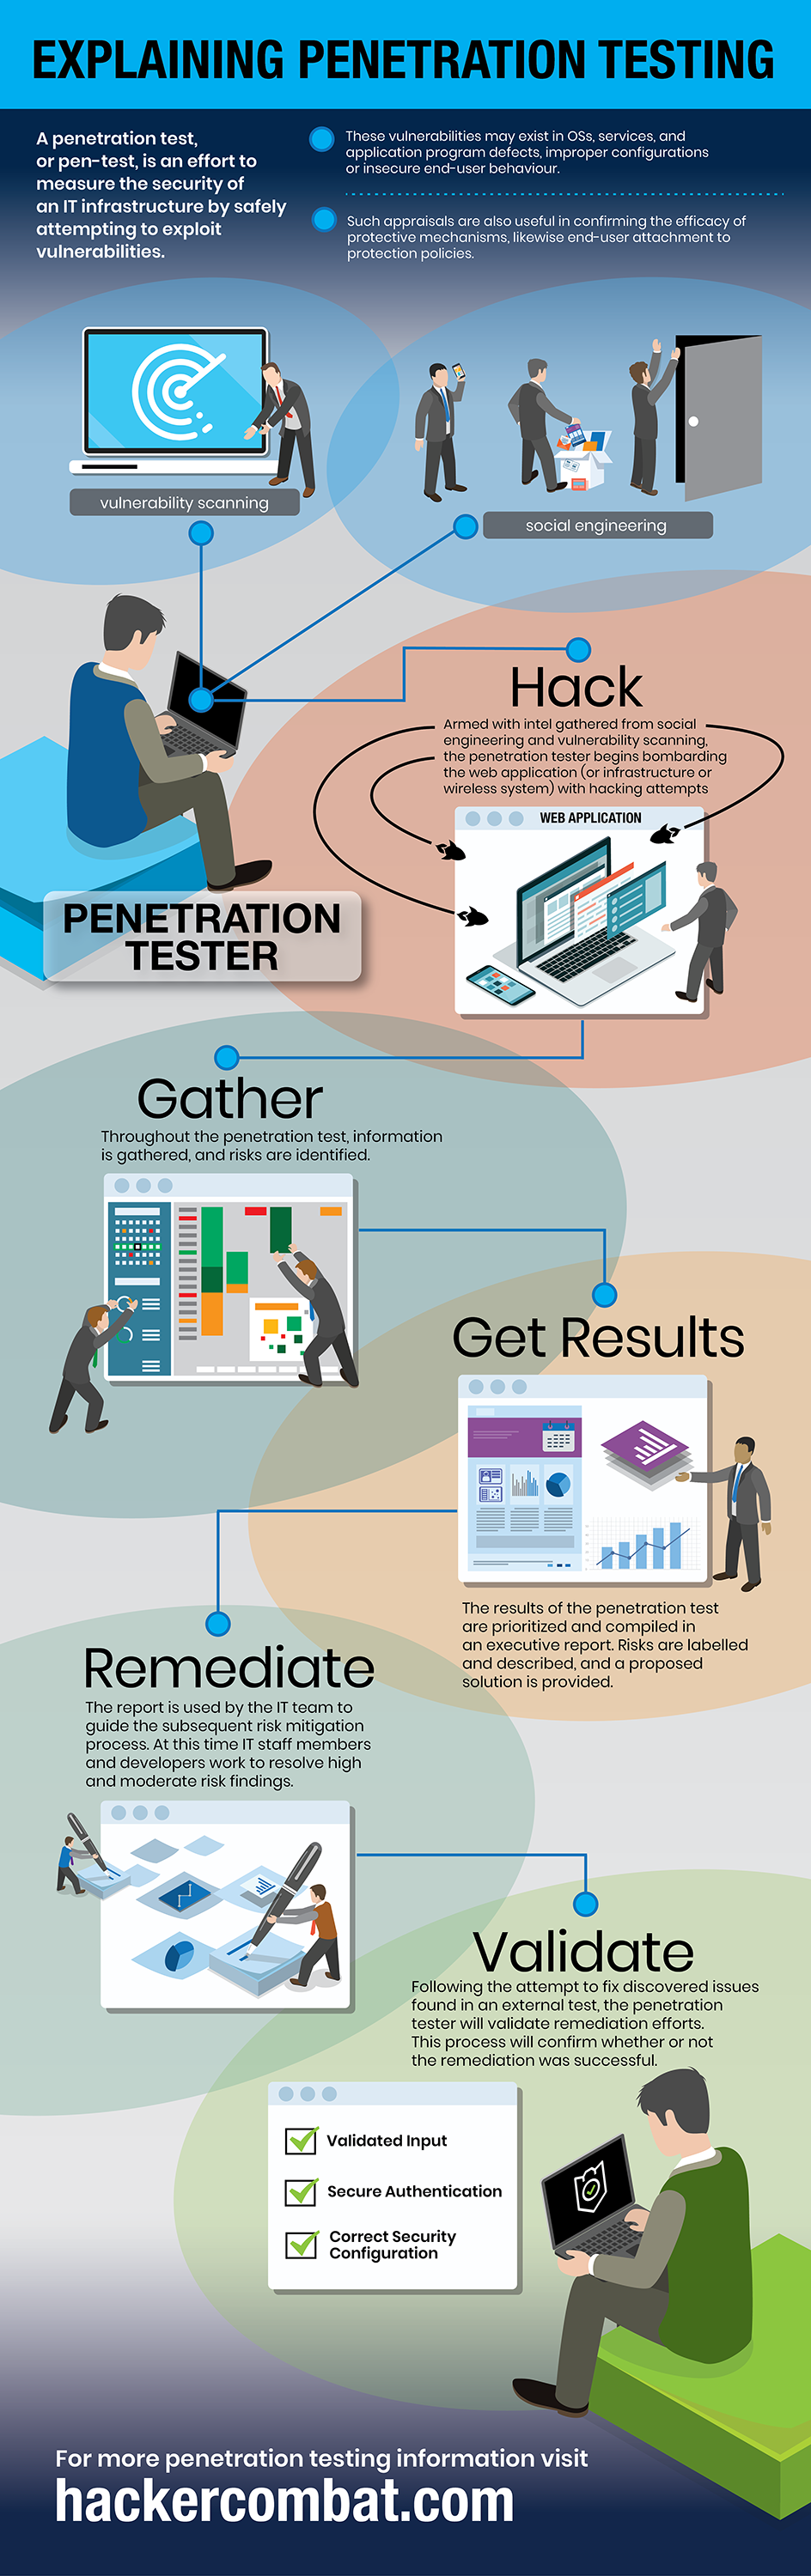 Penetration Testing to check for exploitable vulnerabilities [Infographic]